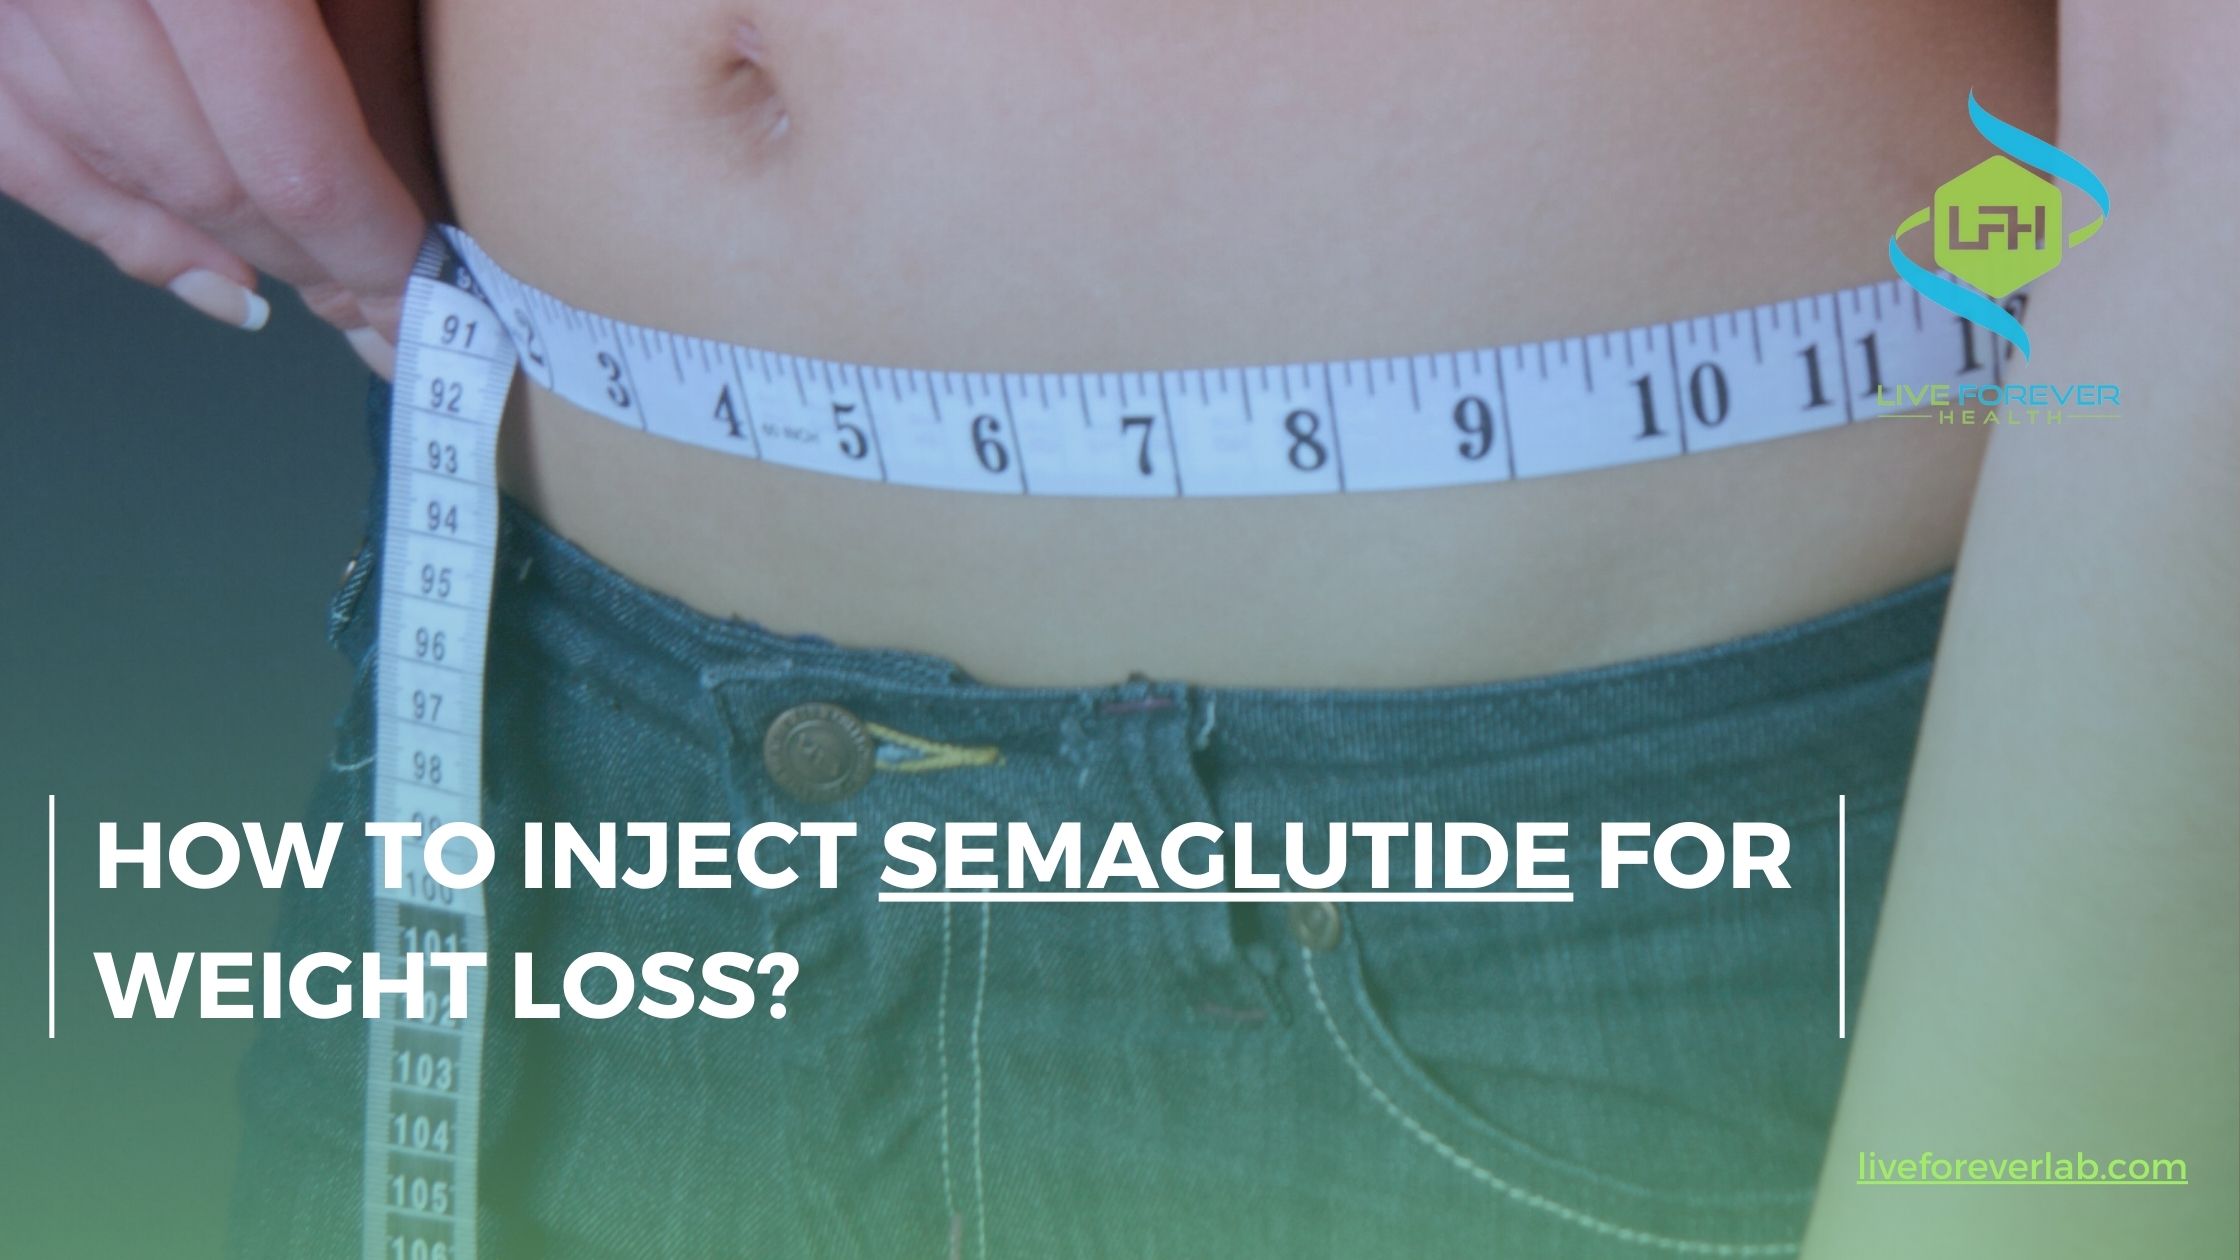 HOW TO INJECT SEMAGLUTIDE FOR WEIGHT LOSS